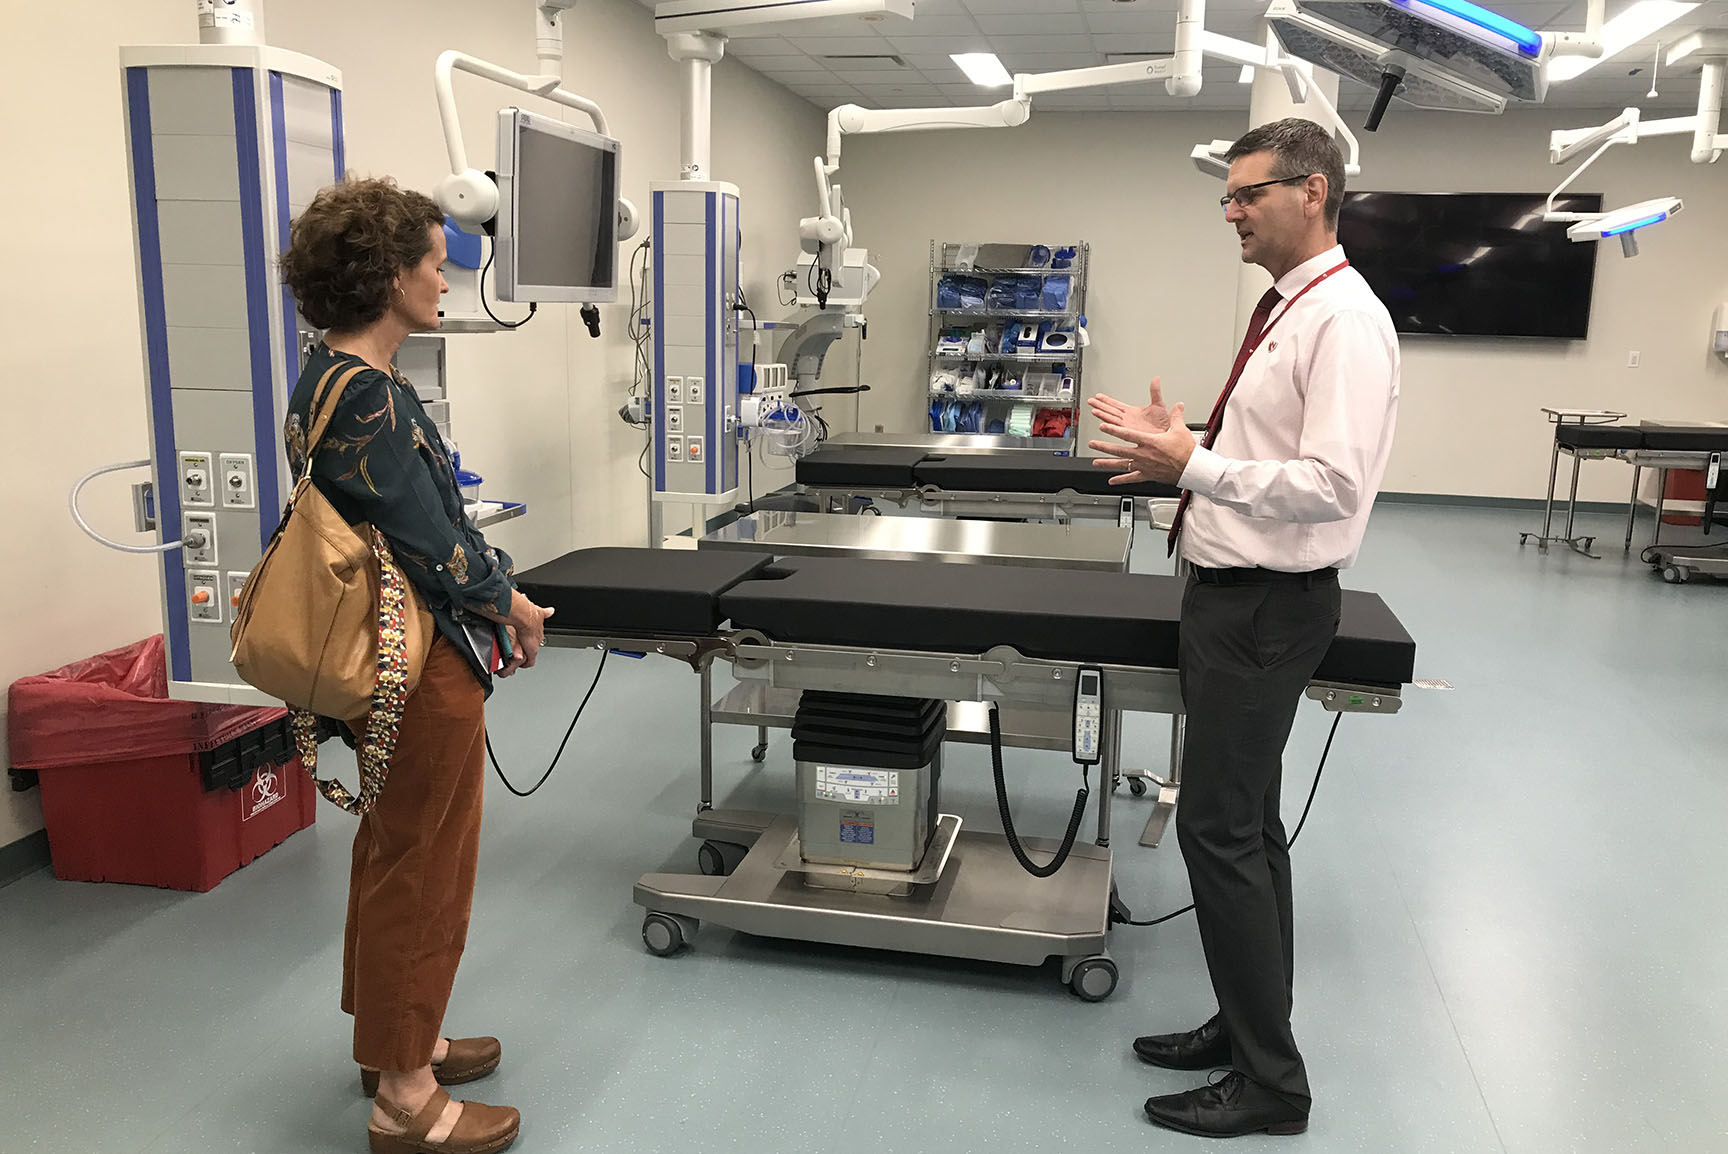 Jana Hughes tours UNMC&apos;s iEXCEL program with Benjamin Stobbe&comma; assistant vice chancellor for clinical simulation with iEXCEL&period;